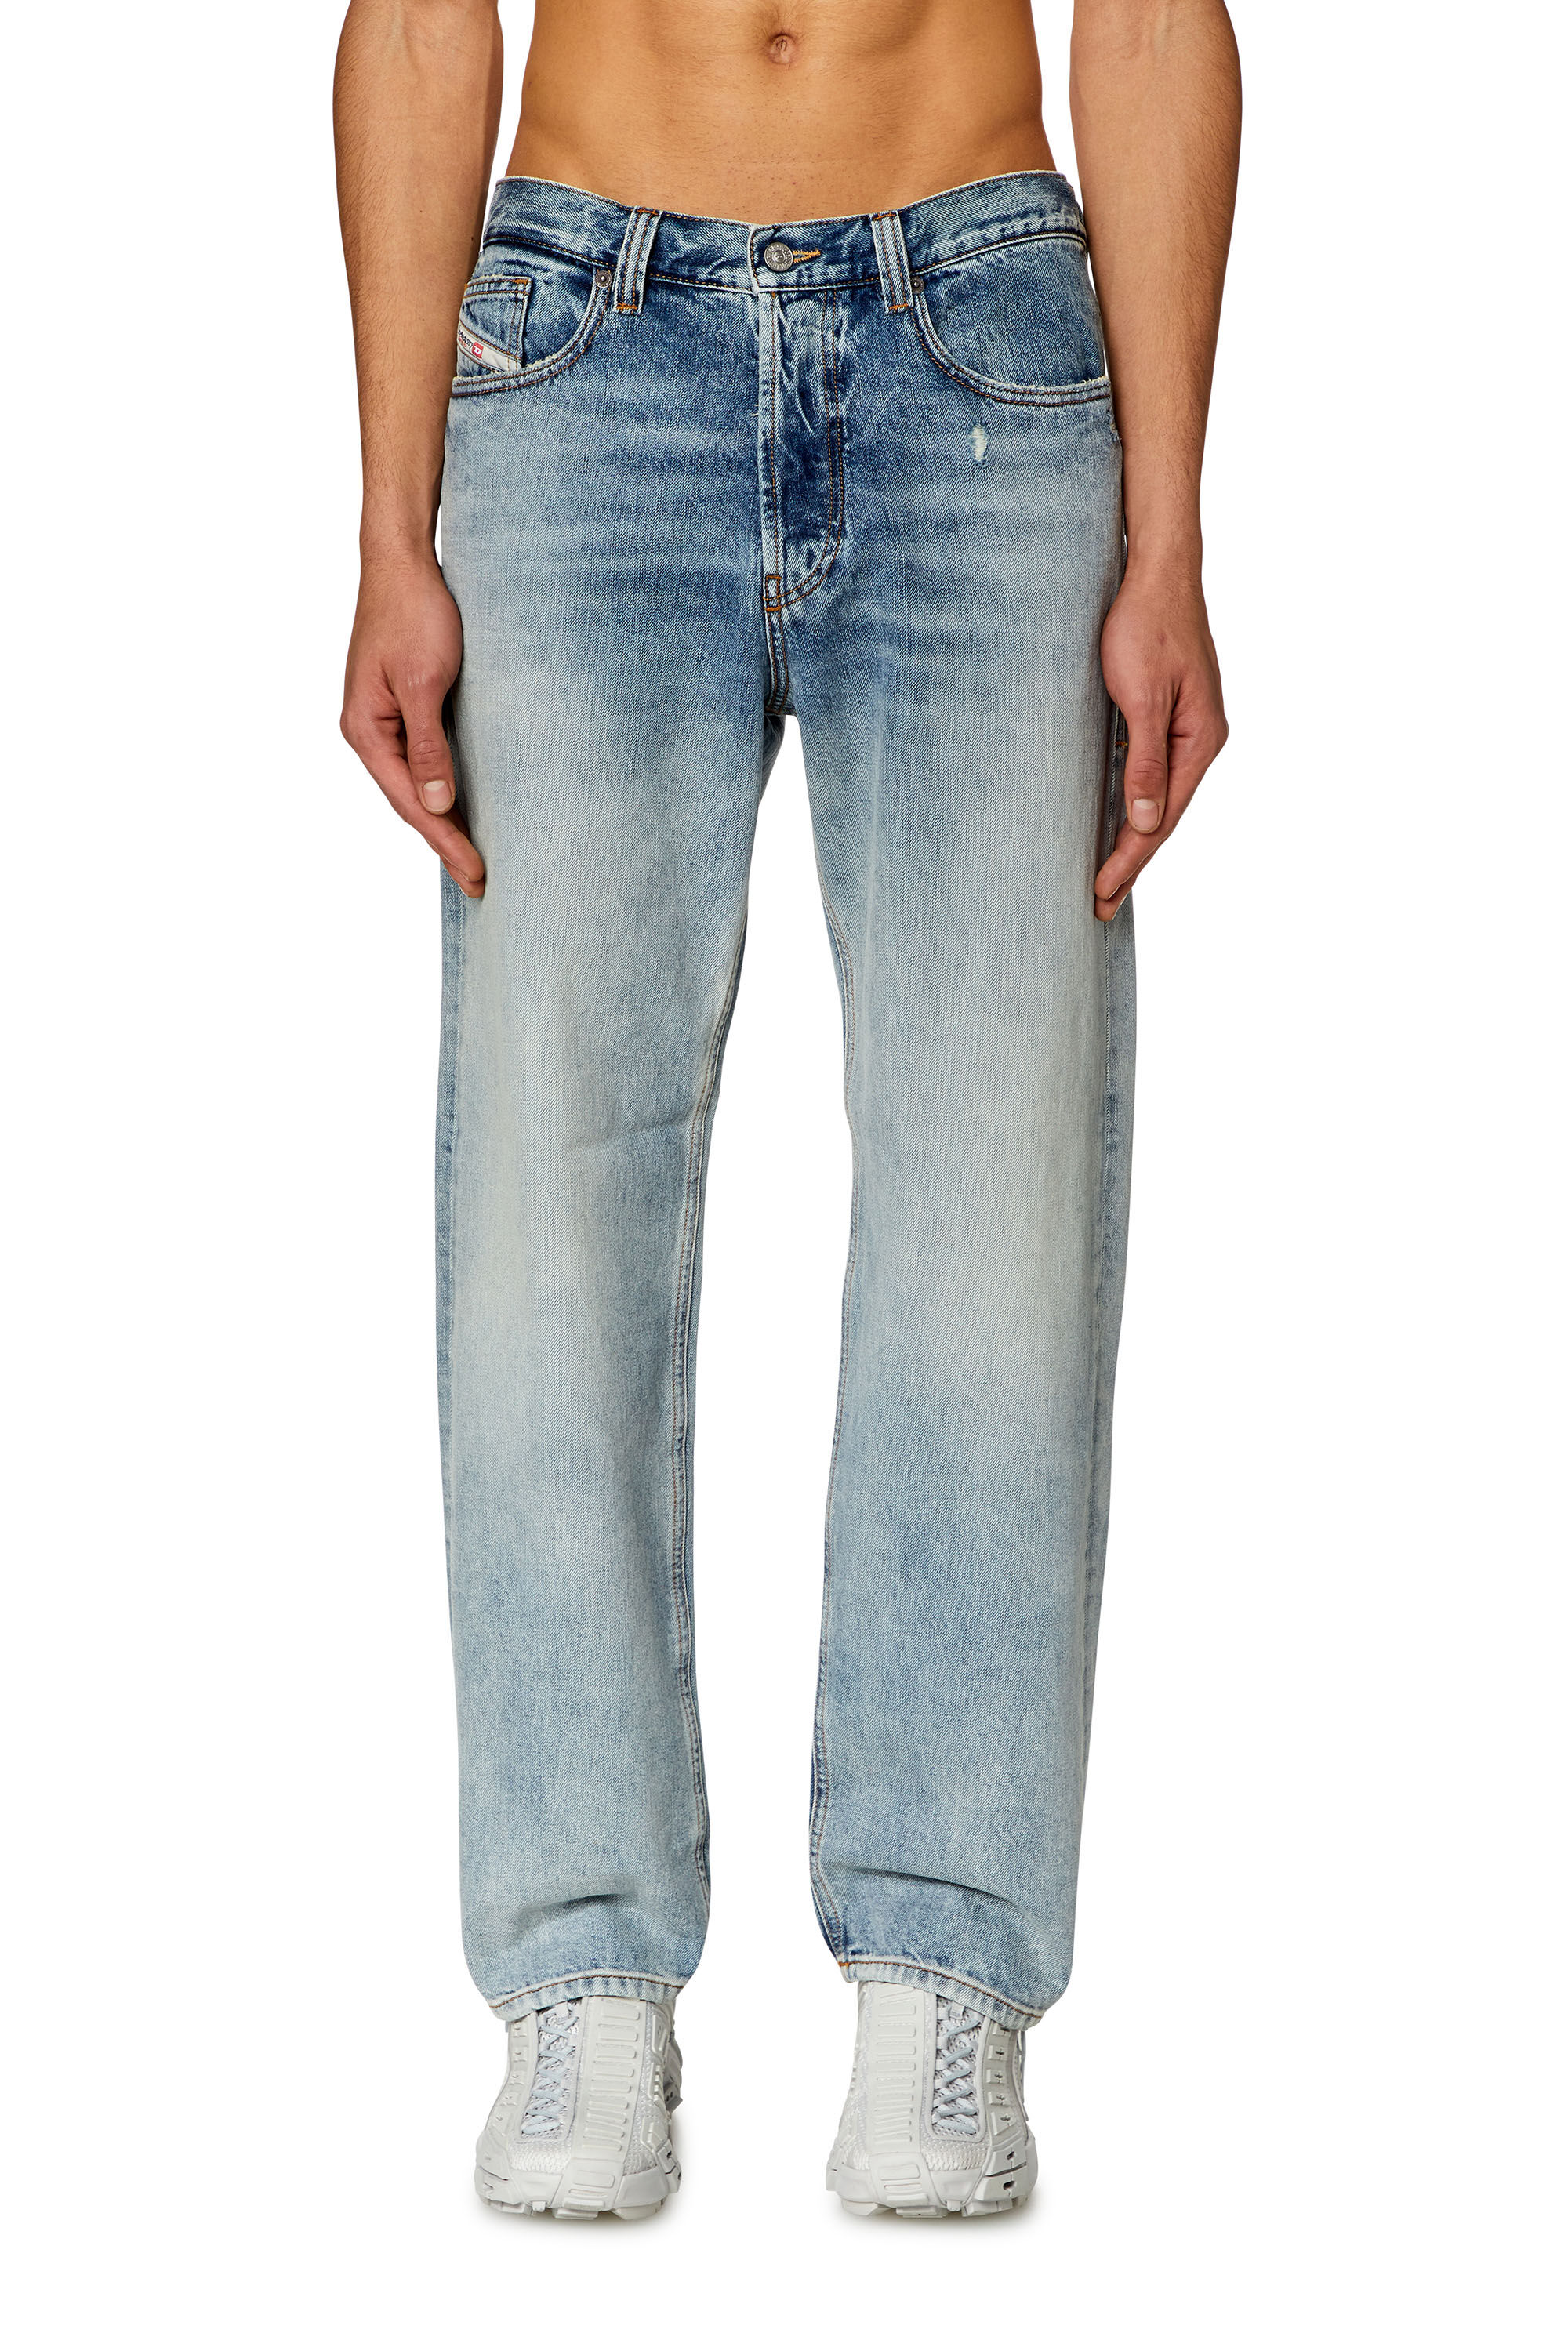 Diesel - Straight Jeans 2010 D-Macs 09H97, Hombre Straight Jeans - 2010 D-Macs in Azul marino - Image 2